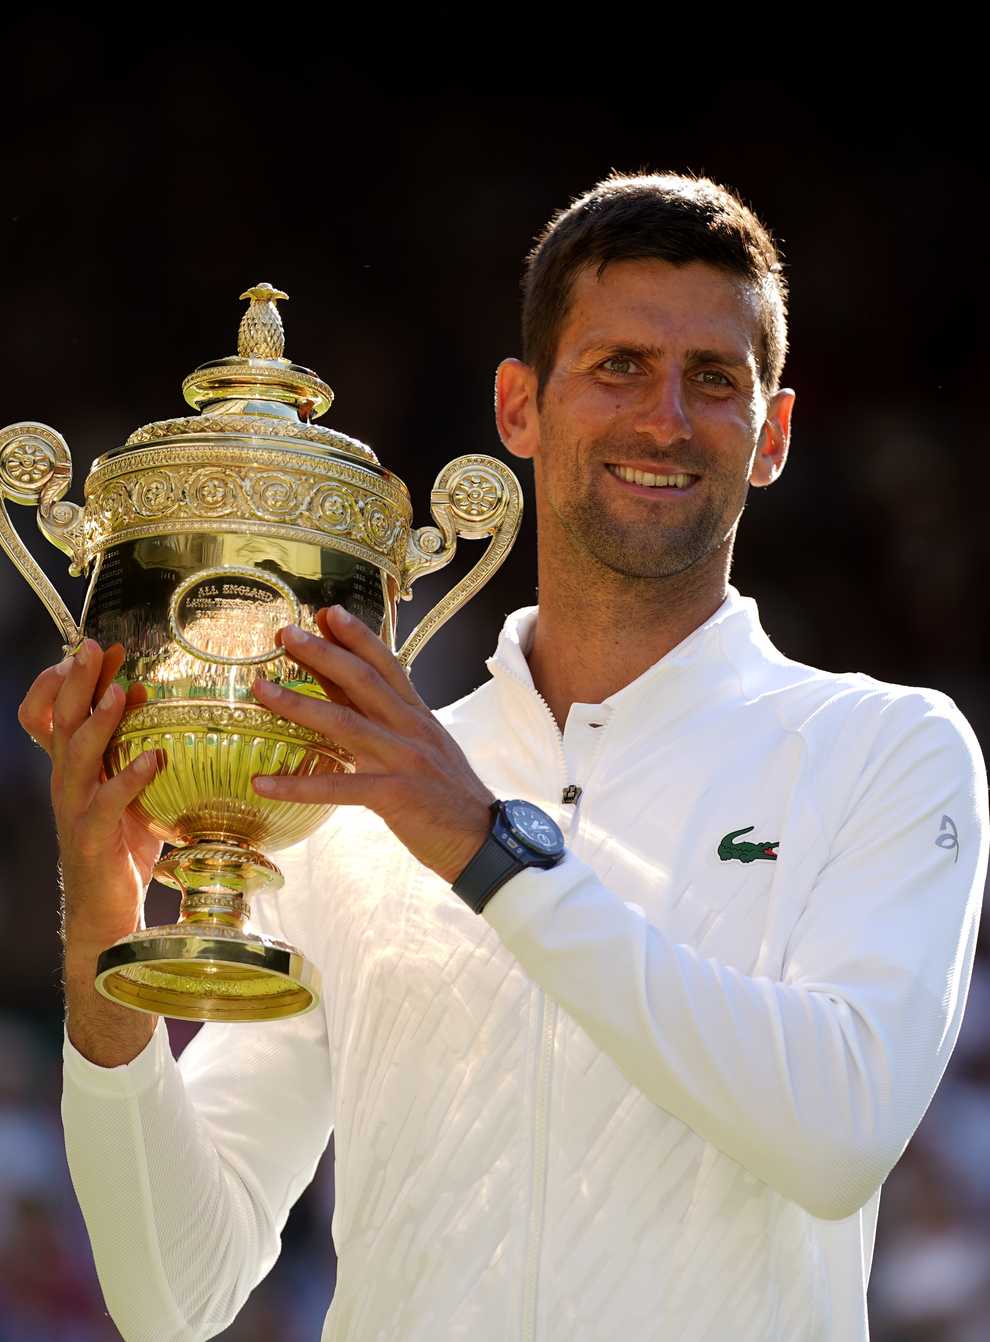 Wimbledon champion Novak Djokovic will compete at this year’s Laver Cup (Adam Davy/PA)